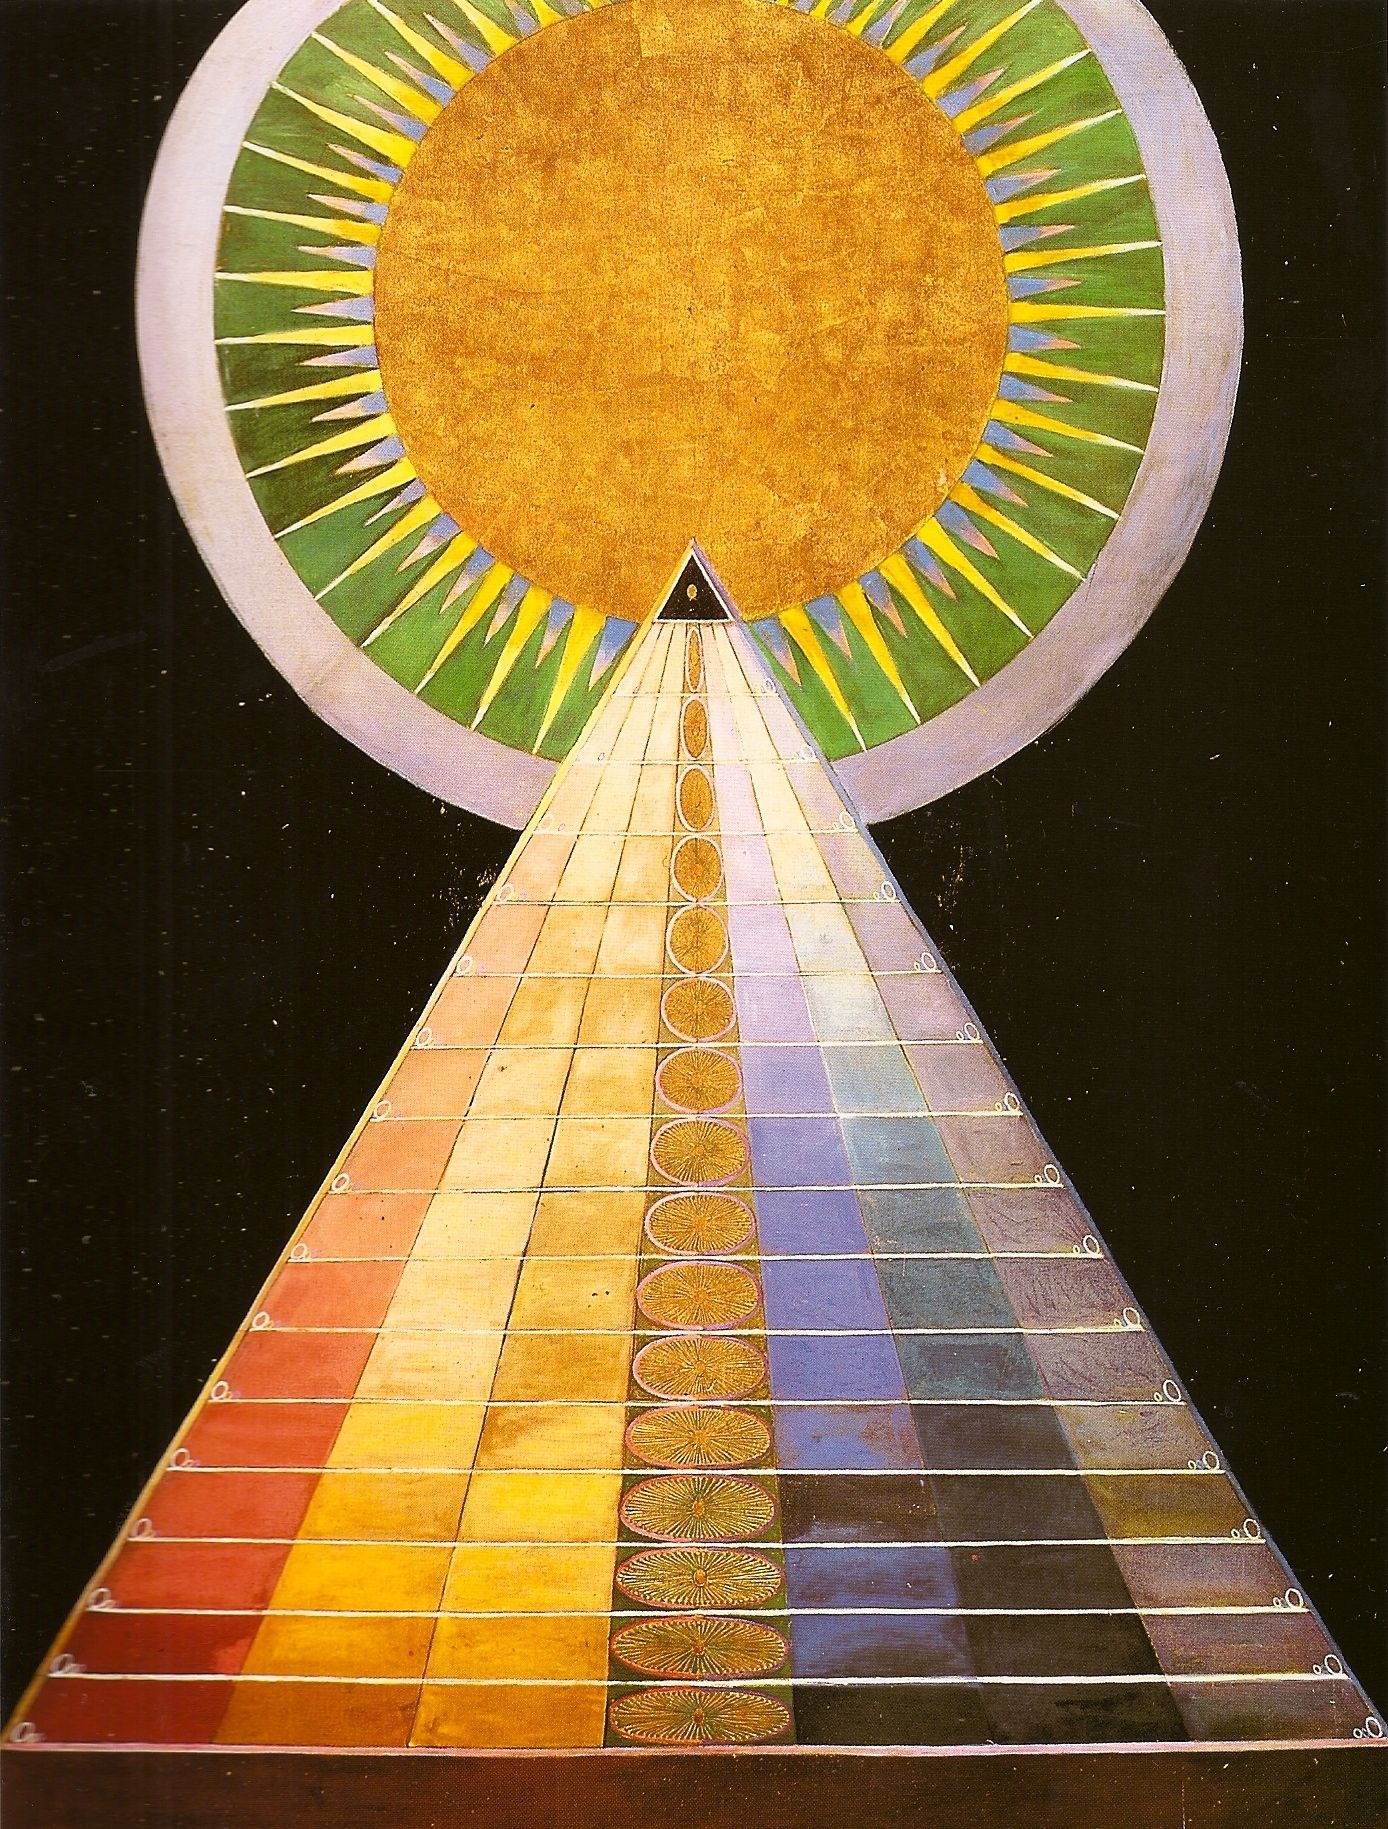 Hilma af Klint, Untitled #1,1915, oil on gold on canvas, private collection